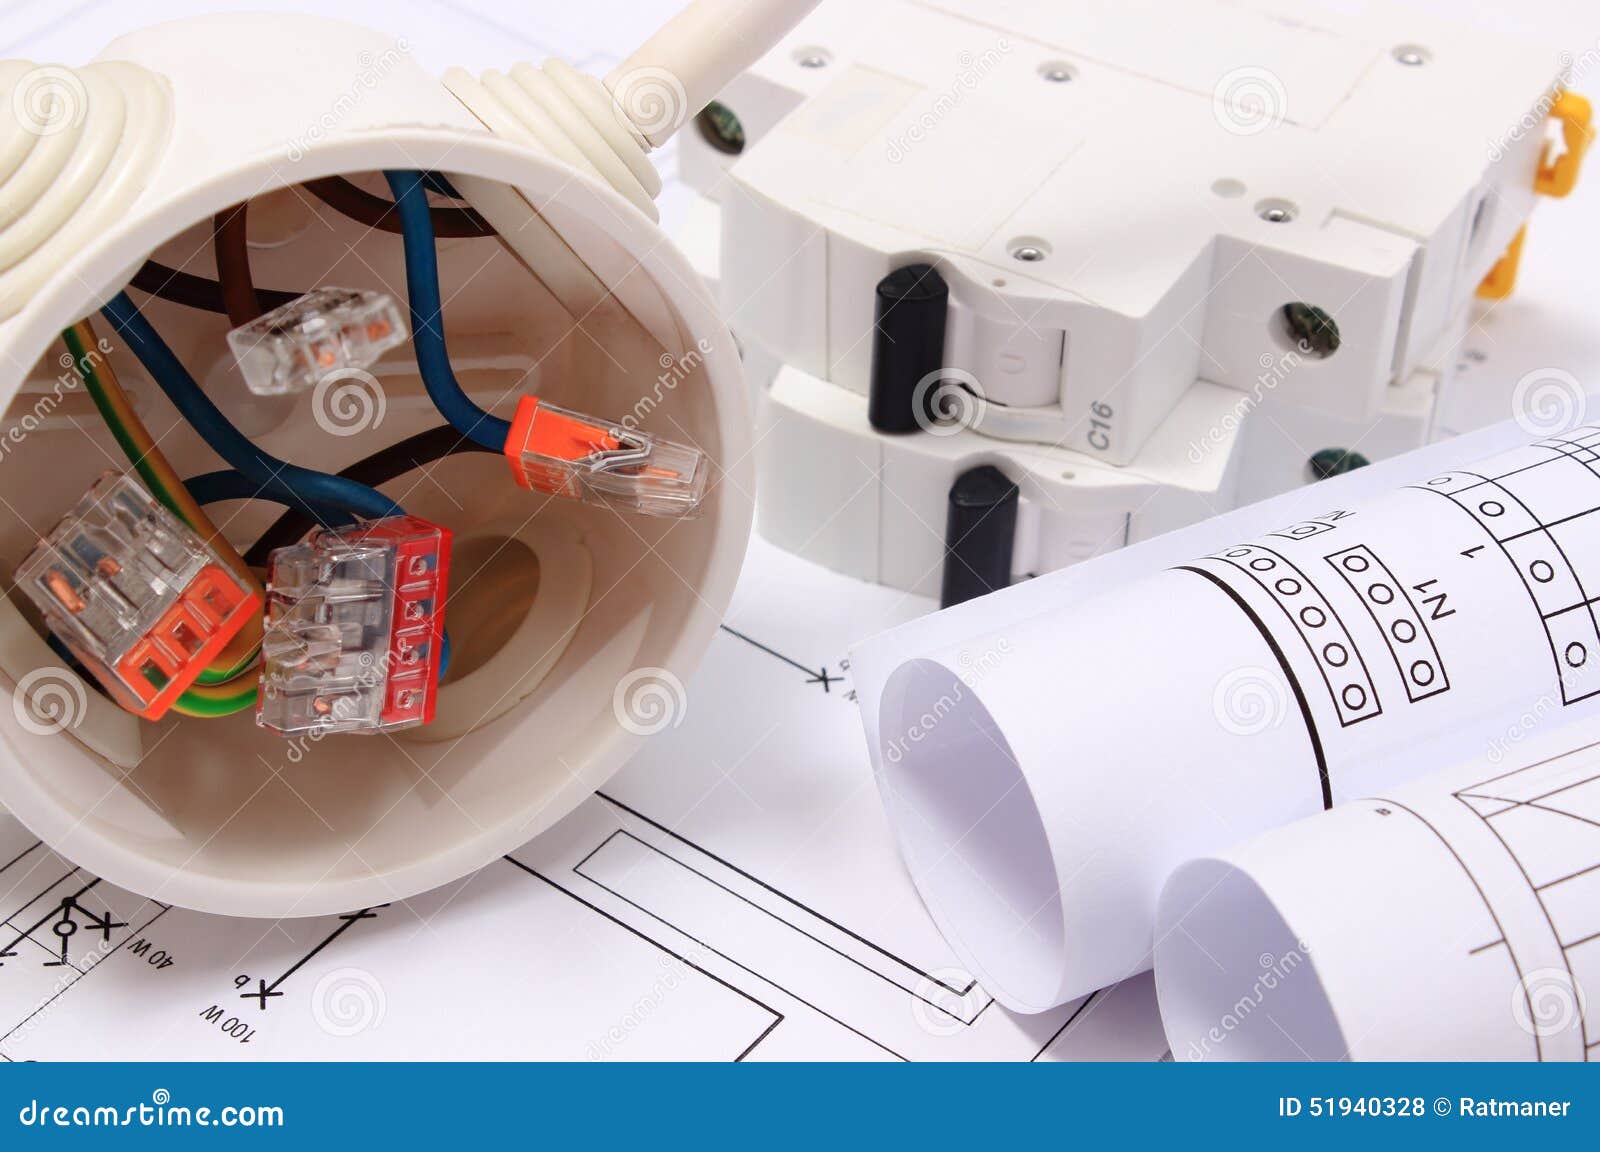 Home Keys And Small House Under Construction On Electrical Drawings Stock  Photo - Download Image Now - iStock